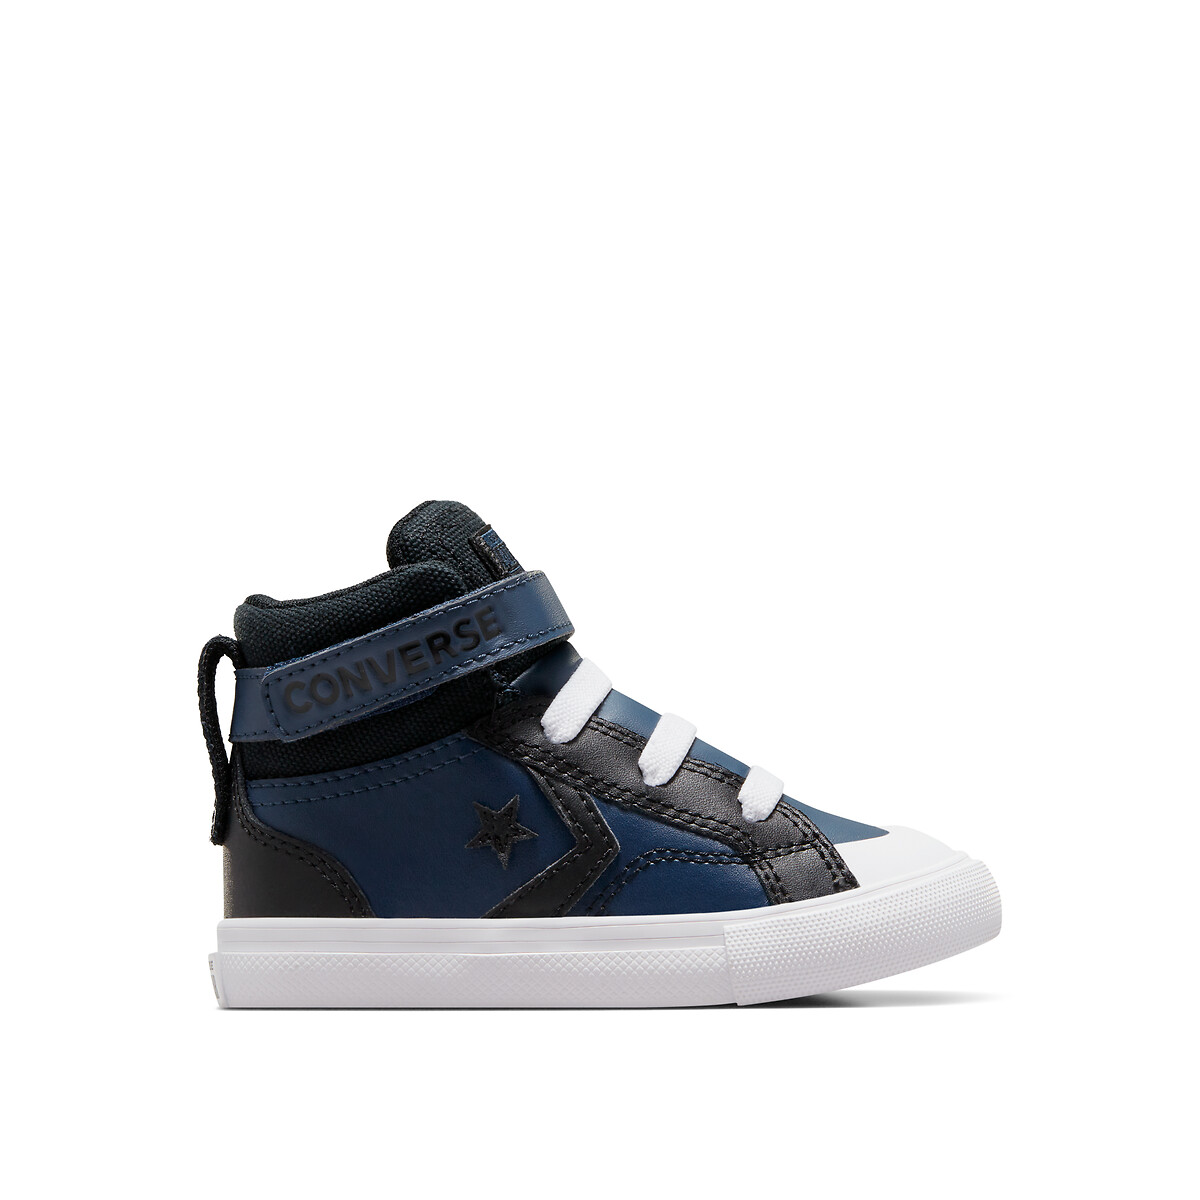 Kids Pro Blaze Strap Sport Remastered Leather High Top Trainers